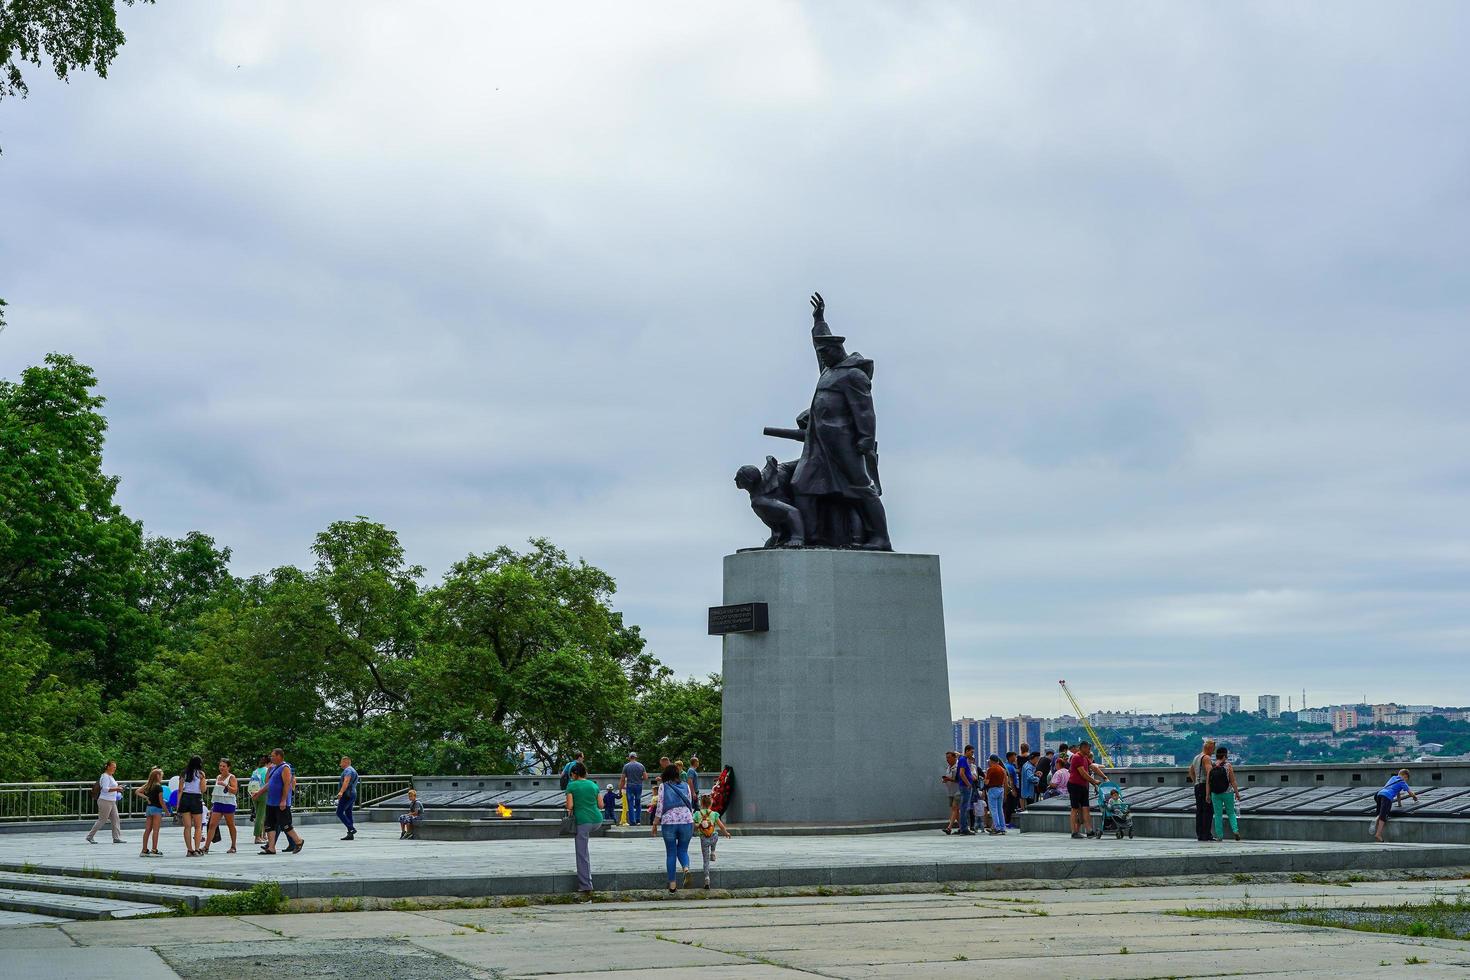 Vladivostok, Russia - July 26, 2020 - Urban landscape with a view of the monument. photo